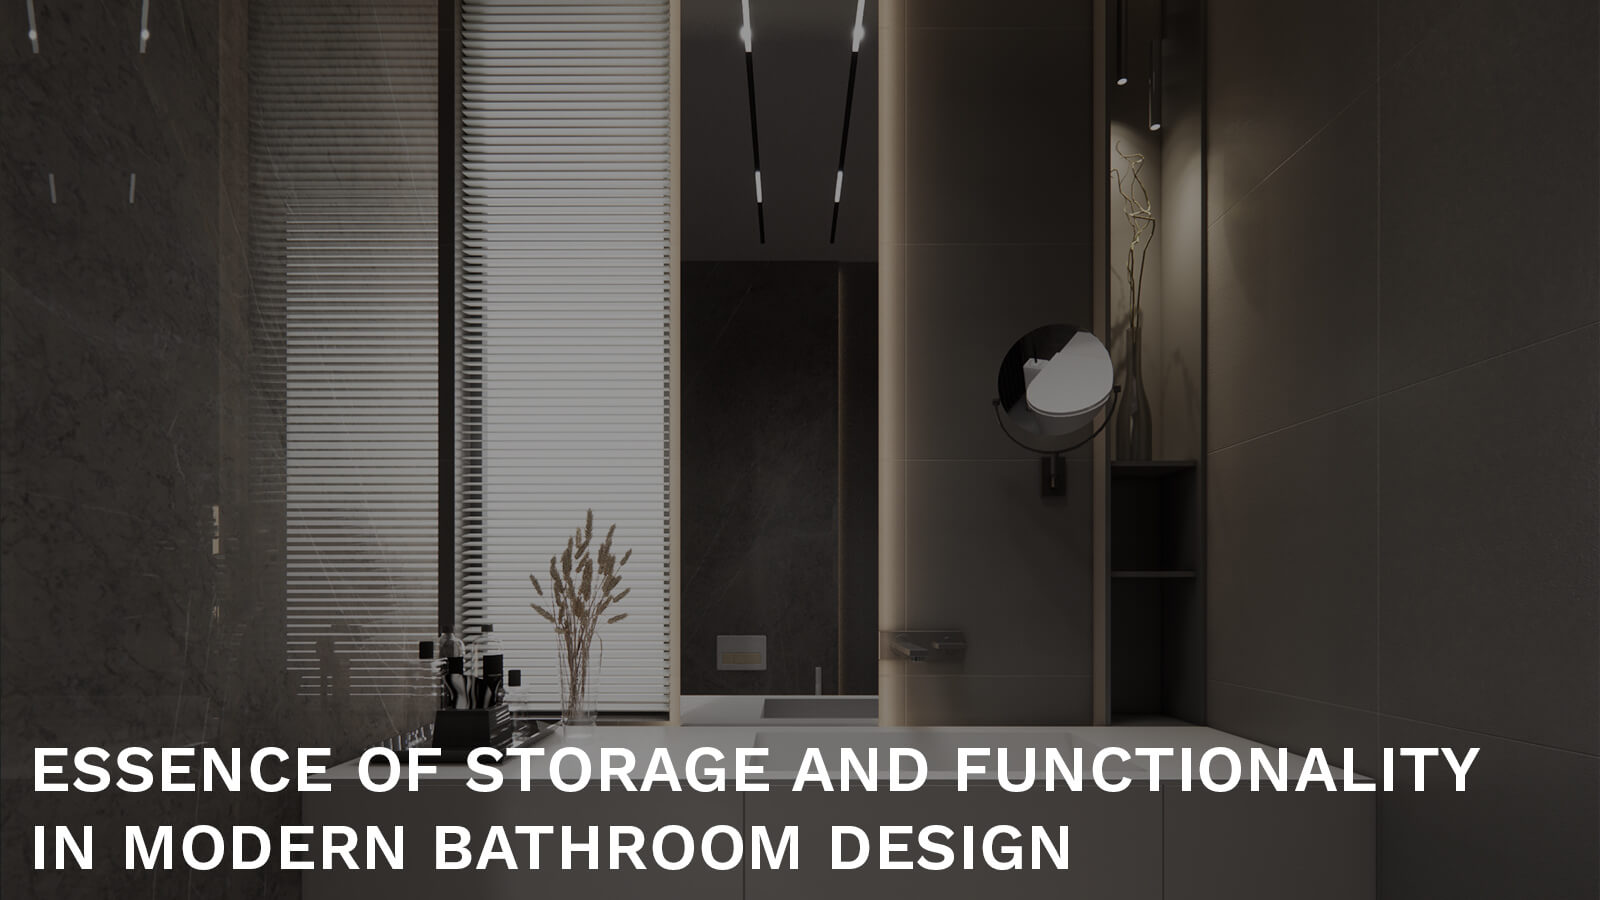 Bathroom Modern design with storage and functionality